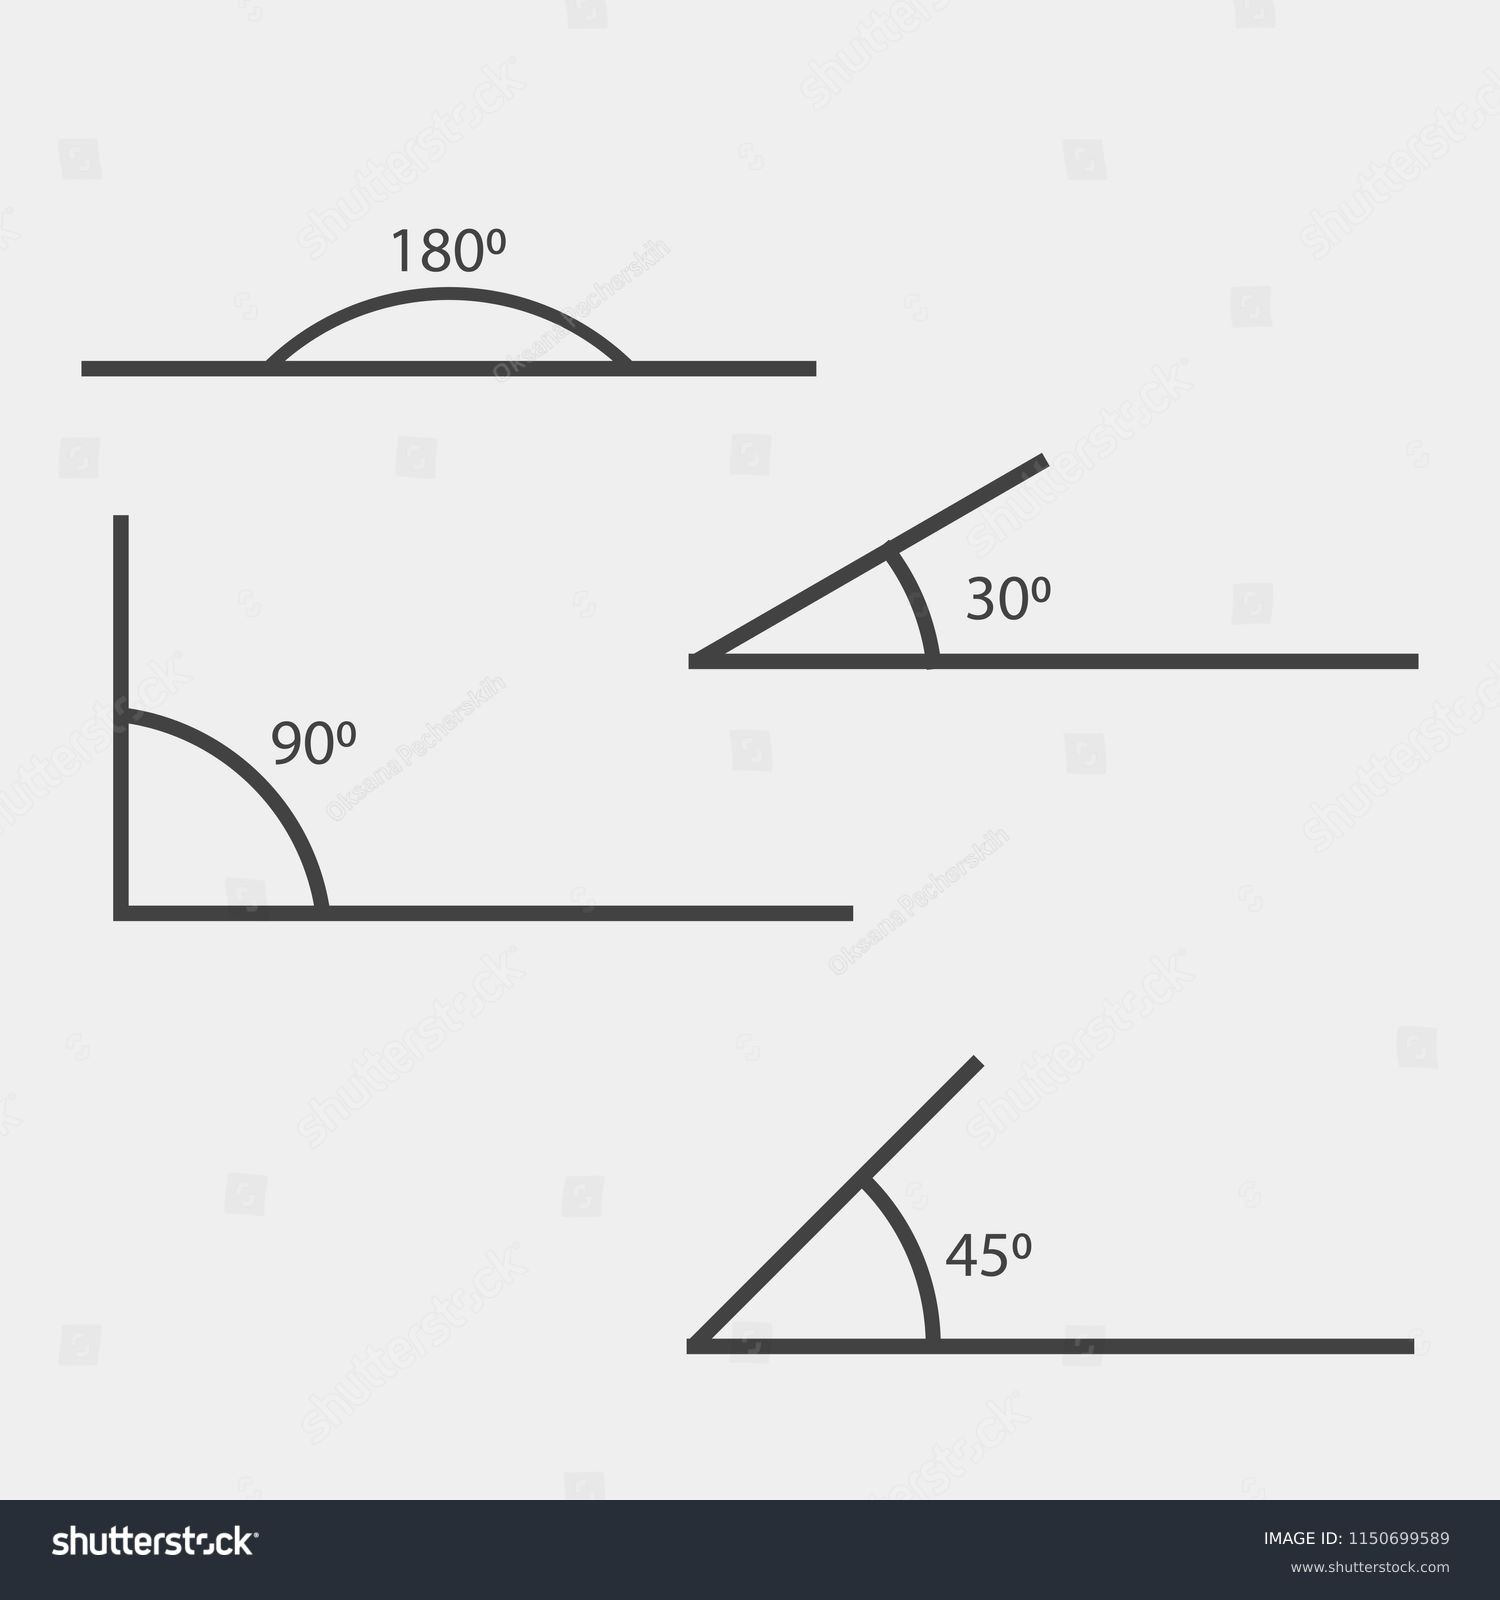 921 30 degree angle Images, Stock Photos & Vectors | Shutterstock